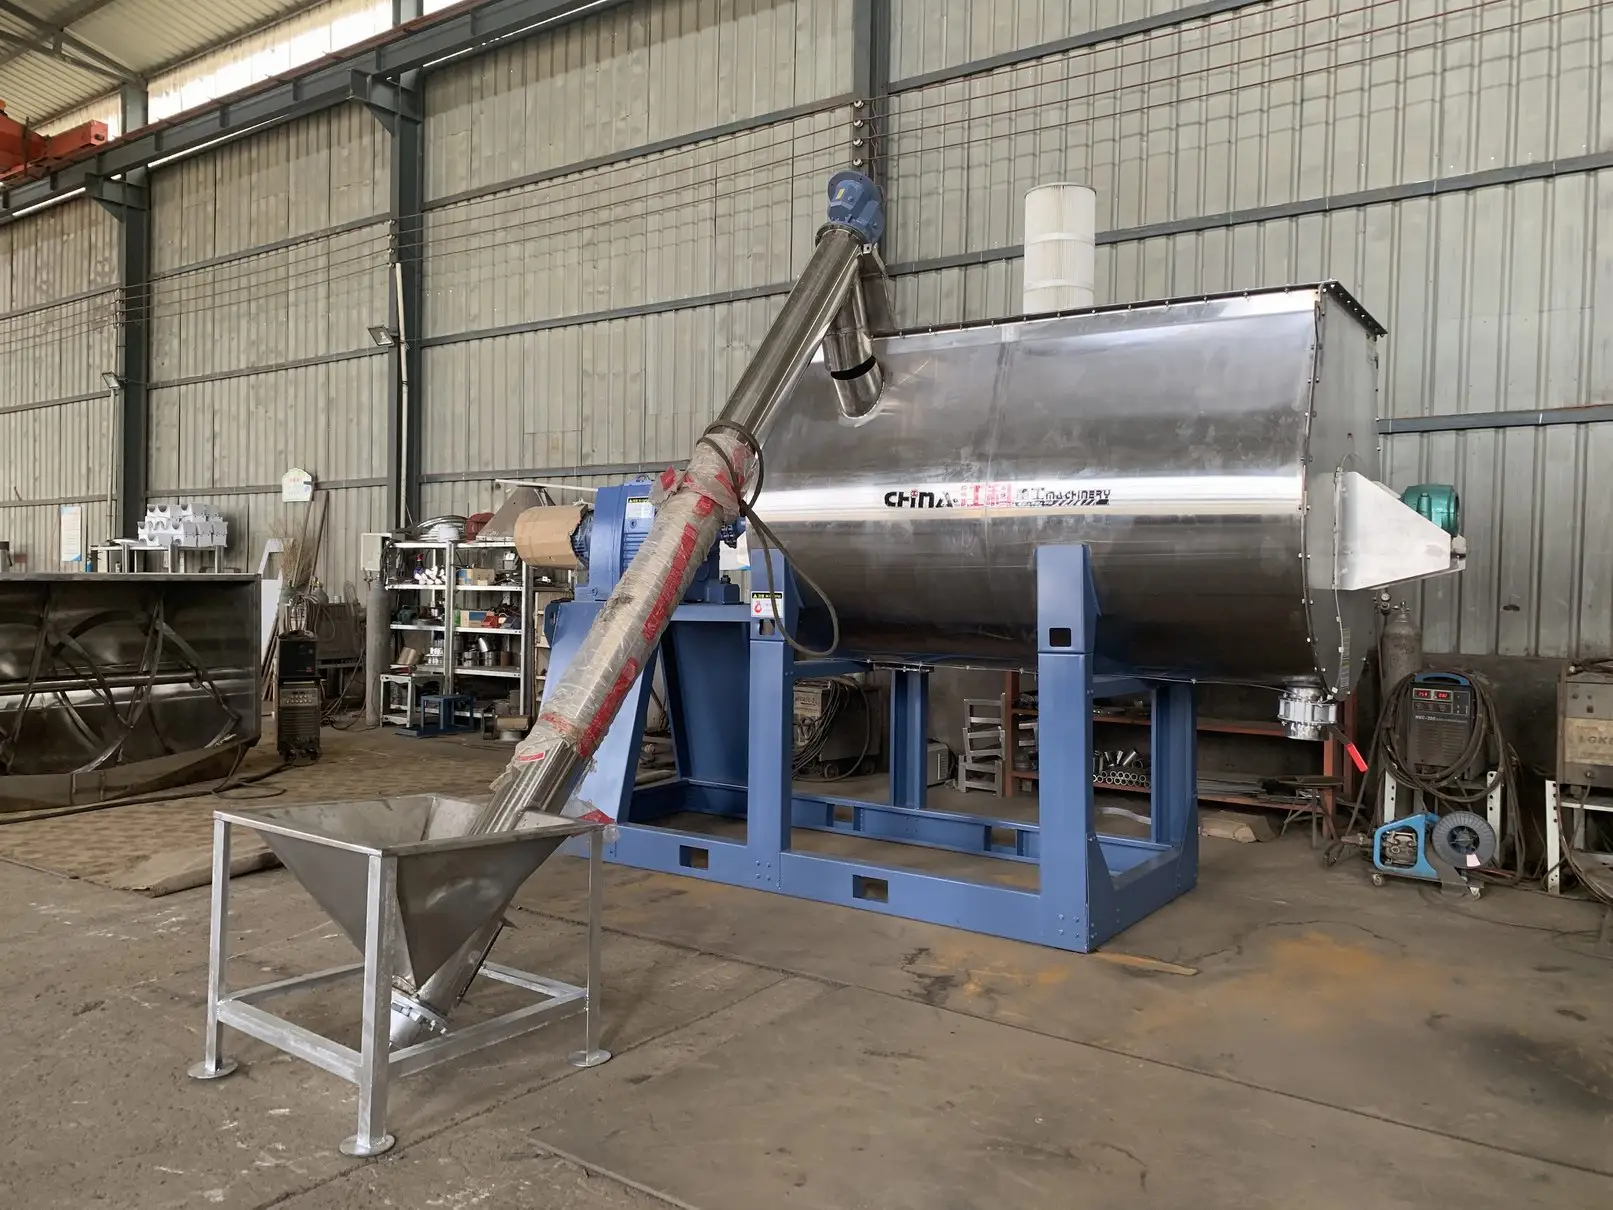 100 150 1000 Kg Stainless Steel Blend Equipment Mix Machine for Dry Powder